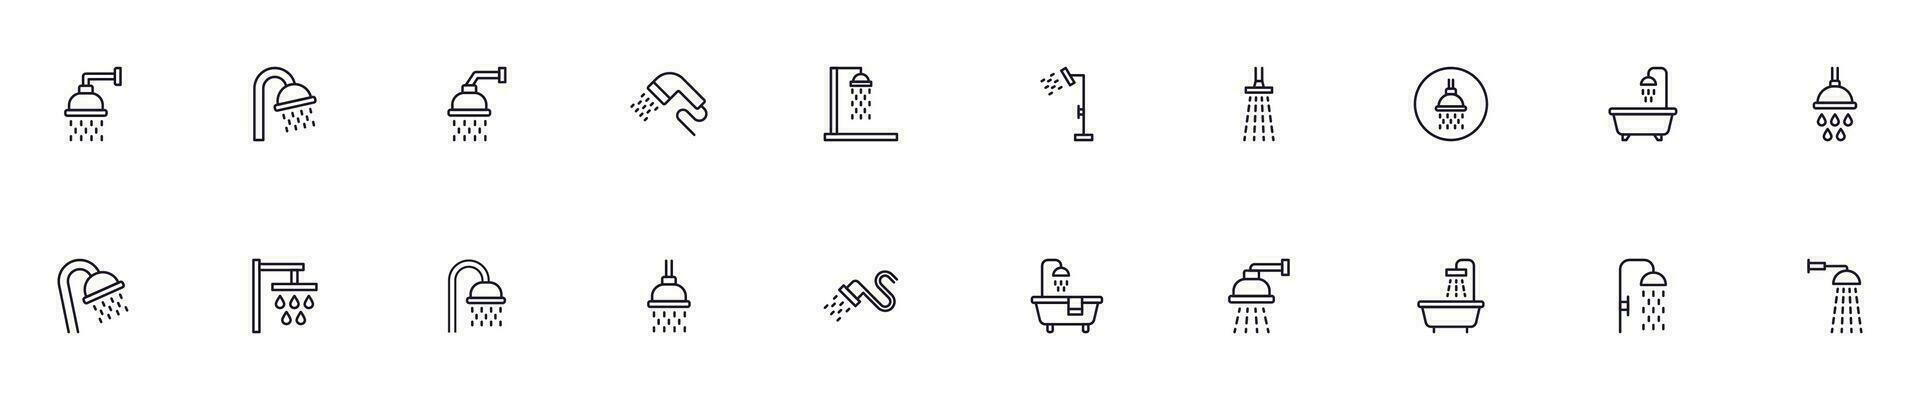 Collection of modern shower outline icons. Set of modern illustrations for mobile apps, web sites, flyers, banners etc isolated on white background. Premium quality signs. vector